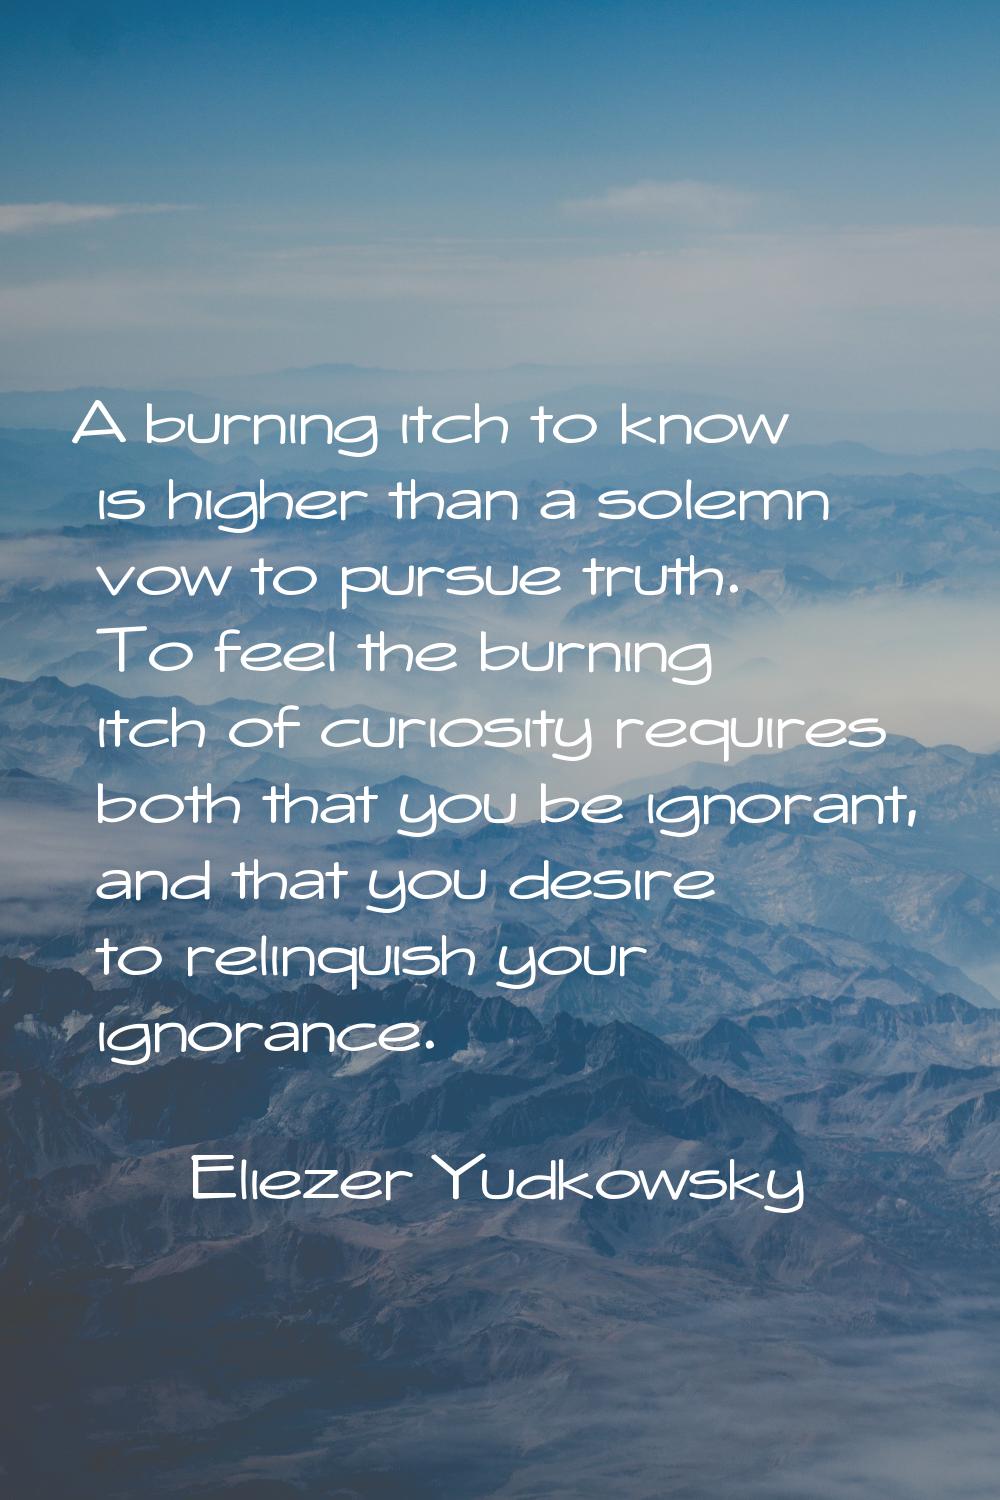 A burning itch to know is higher than a solemn vow to pursue truth. To feel the burning itch of cur